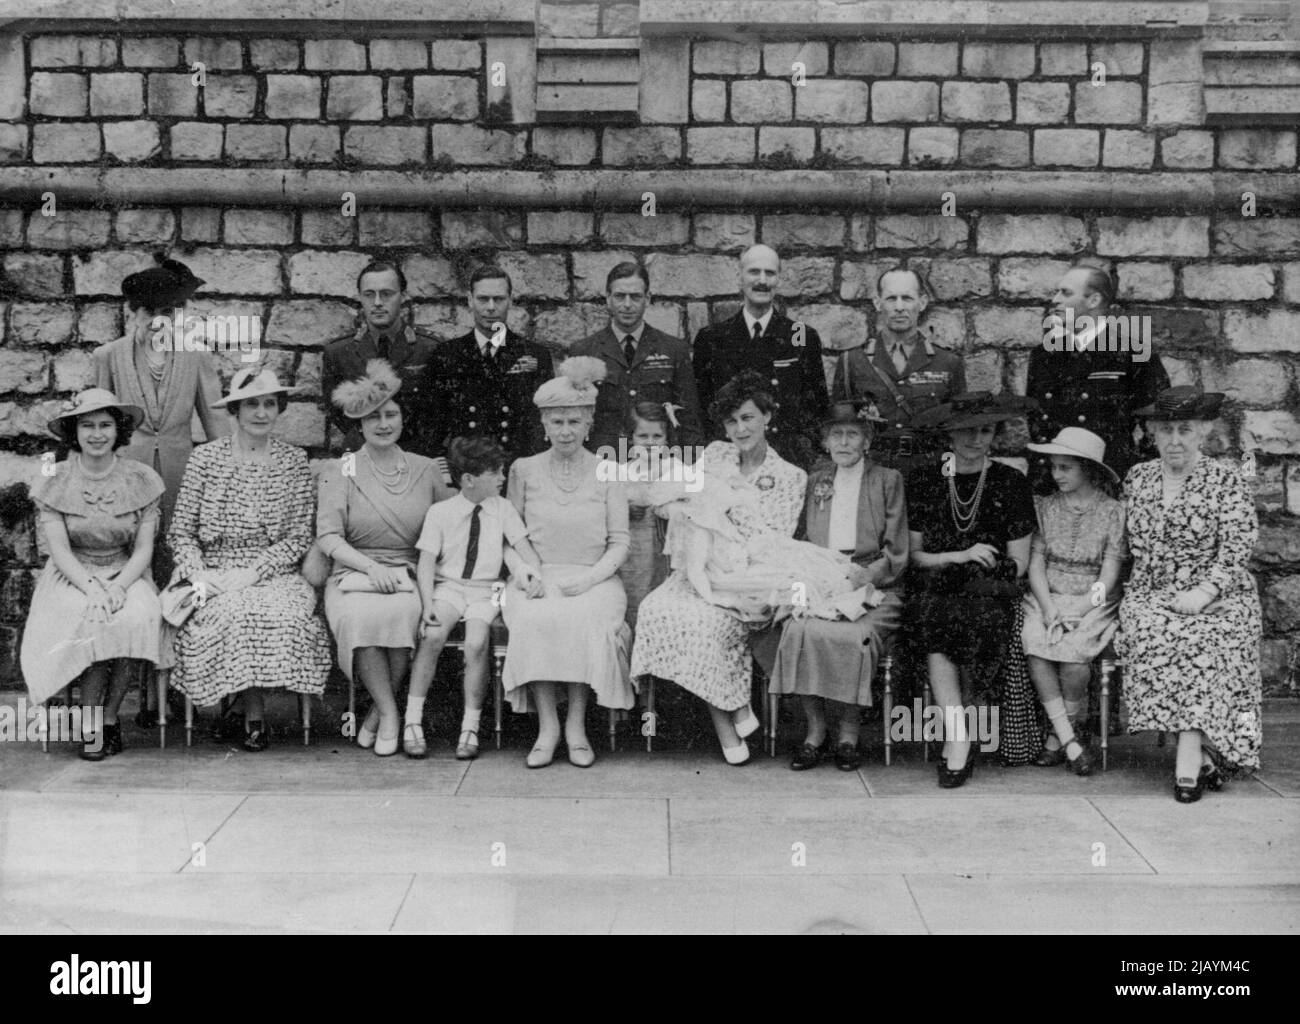 Christening Of The Duke And Duchess Of Kent's Baby. A photograph taken at the christening of the infant Prince George of Kent. Front row. Princess Elizabeth, Lady Patricia Ramsay, The Queen, Prince Edward, Queen Mary, Princess Alexandra, Duchess of Kent and the infant Prince, the Dowager Marchioness of Milford Haven, the Crown Princess Martha of Norway, Princess Margaret, and Princess Helena Victoria. Princess Marie Louise, Prince Bernhard of the Netherlands, the King, the Duke of Kent, King Haakon of Norway, King George of the Hellenes and Prince Olaf of Norway. August 05, 1942. (Photo by Spo Stock Photo